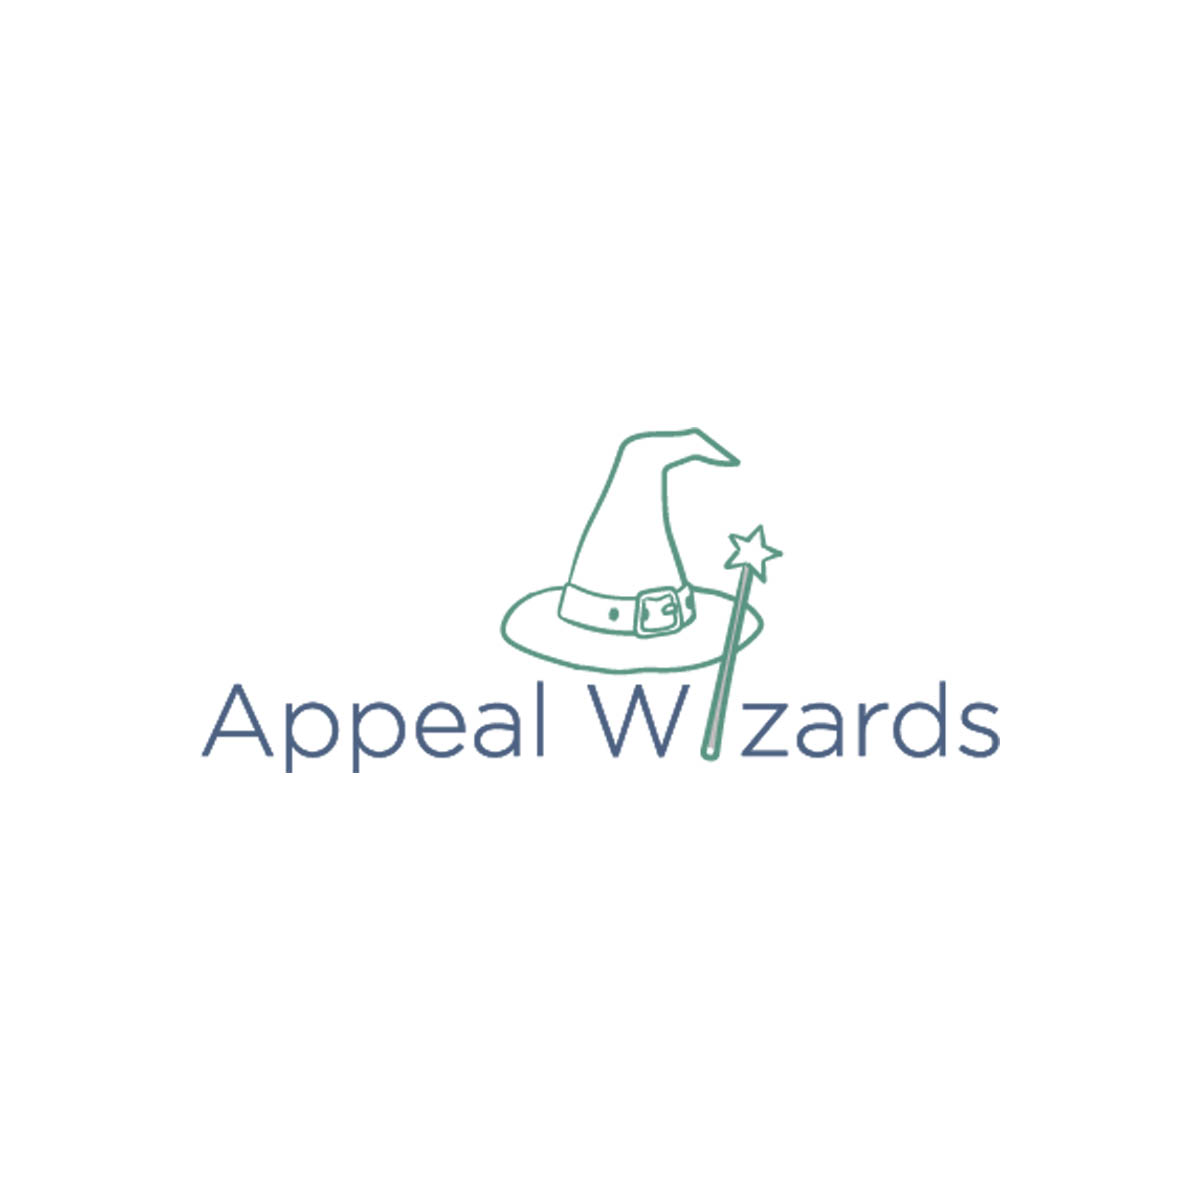 Appeal Wizards